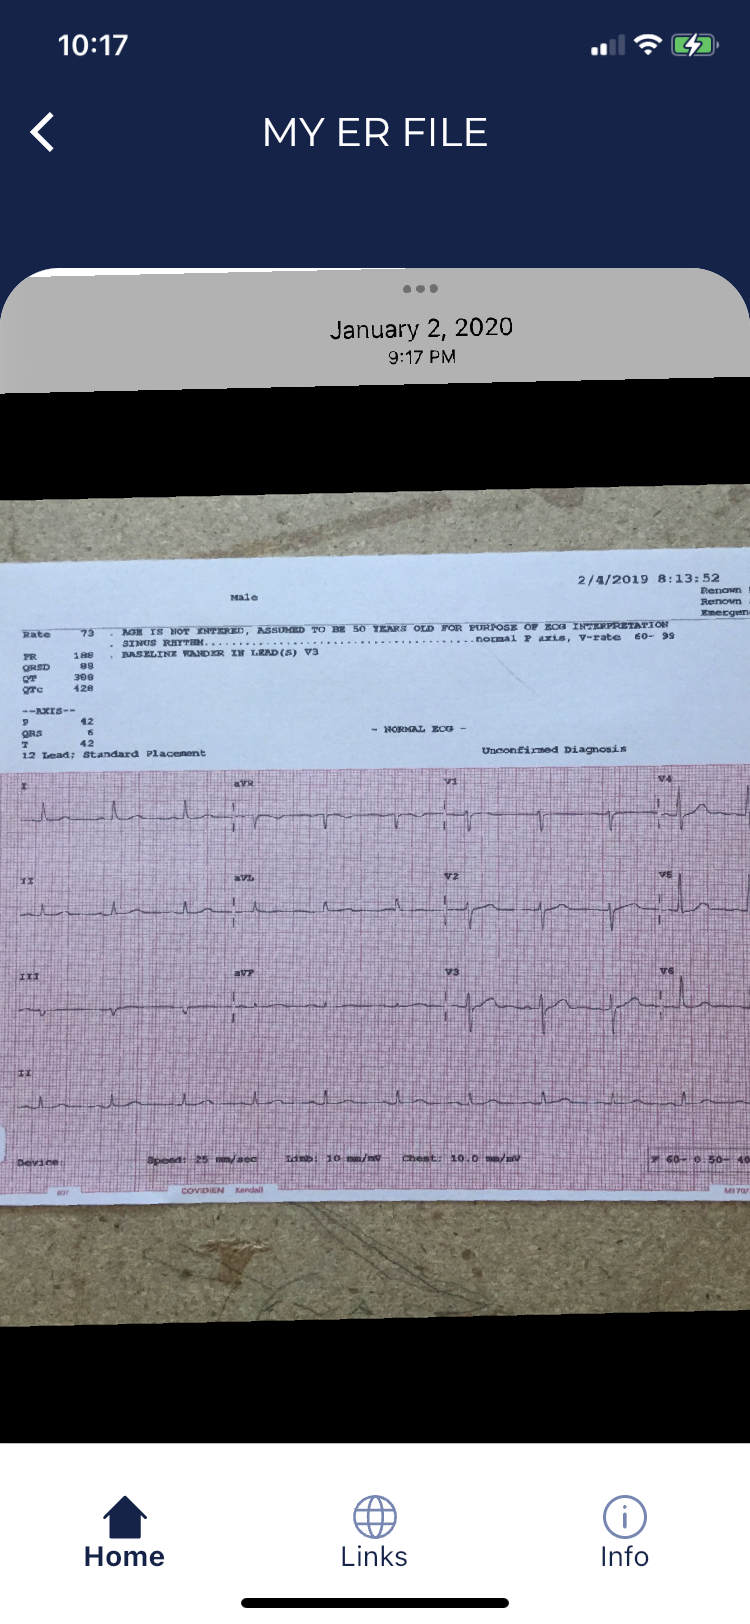 Picture of an EKG that can be enlarged to view details.